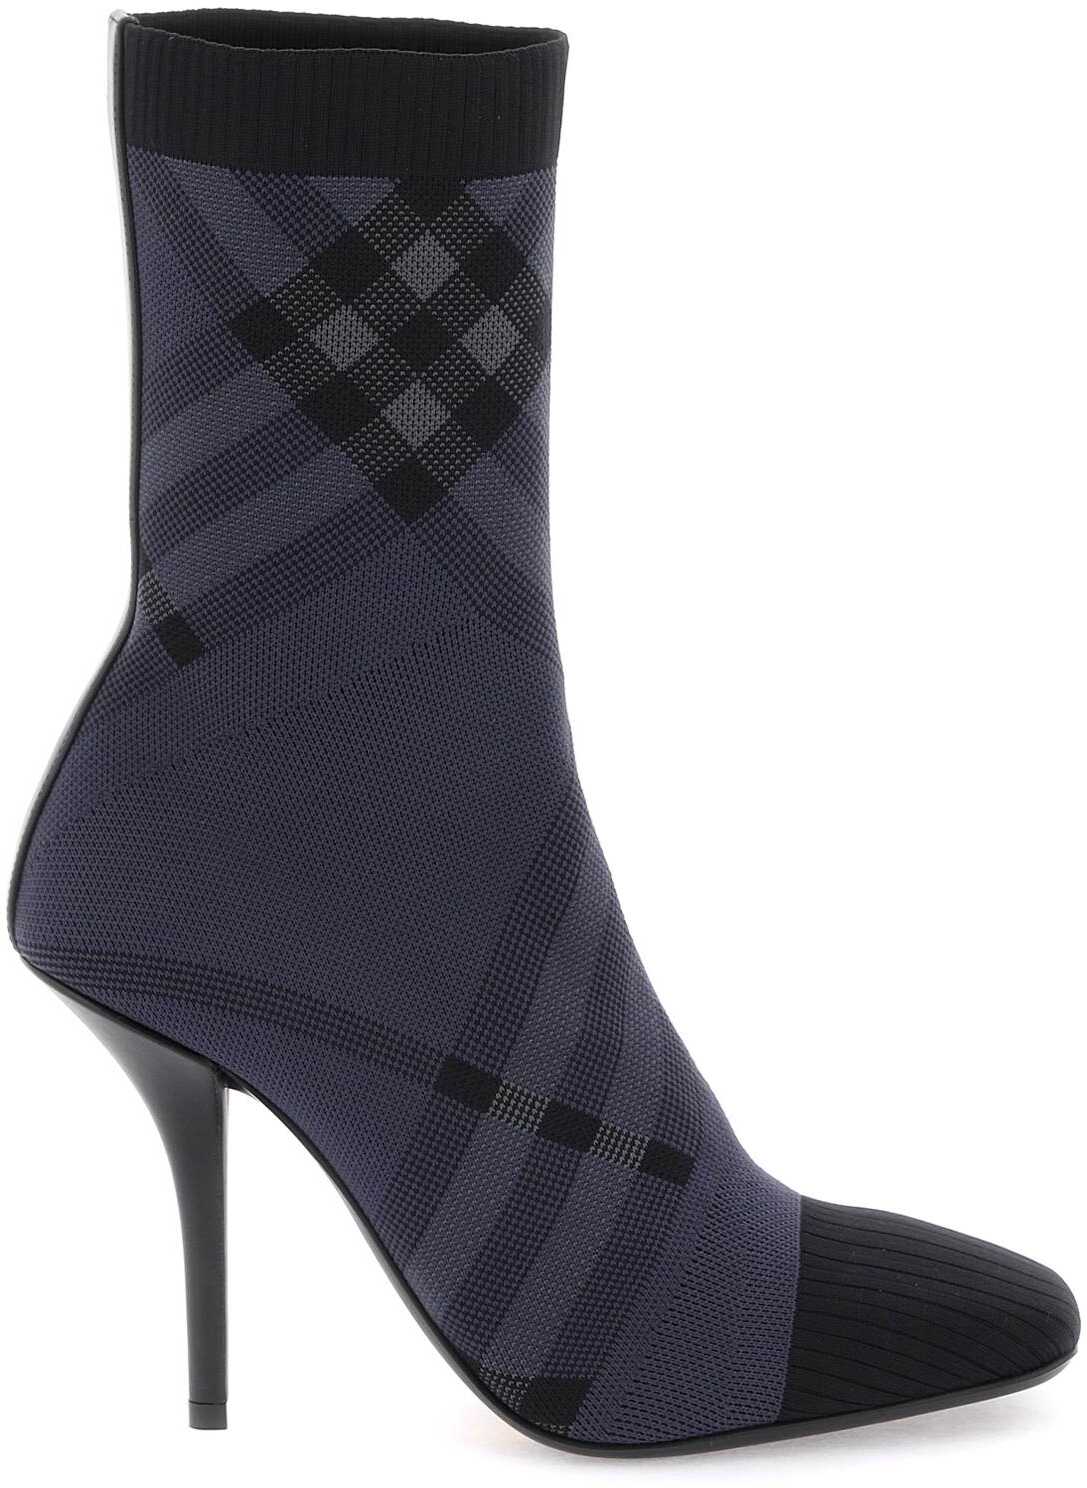 Burberry Check Fabric Ankle Boots CHARCOAL GREY IP CHK image13